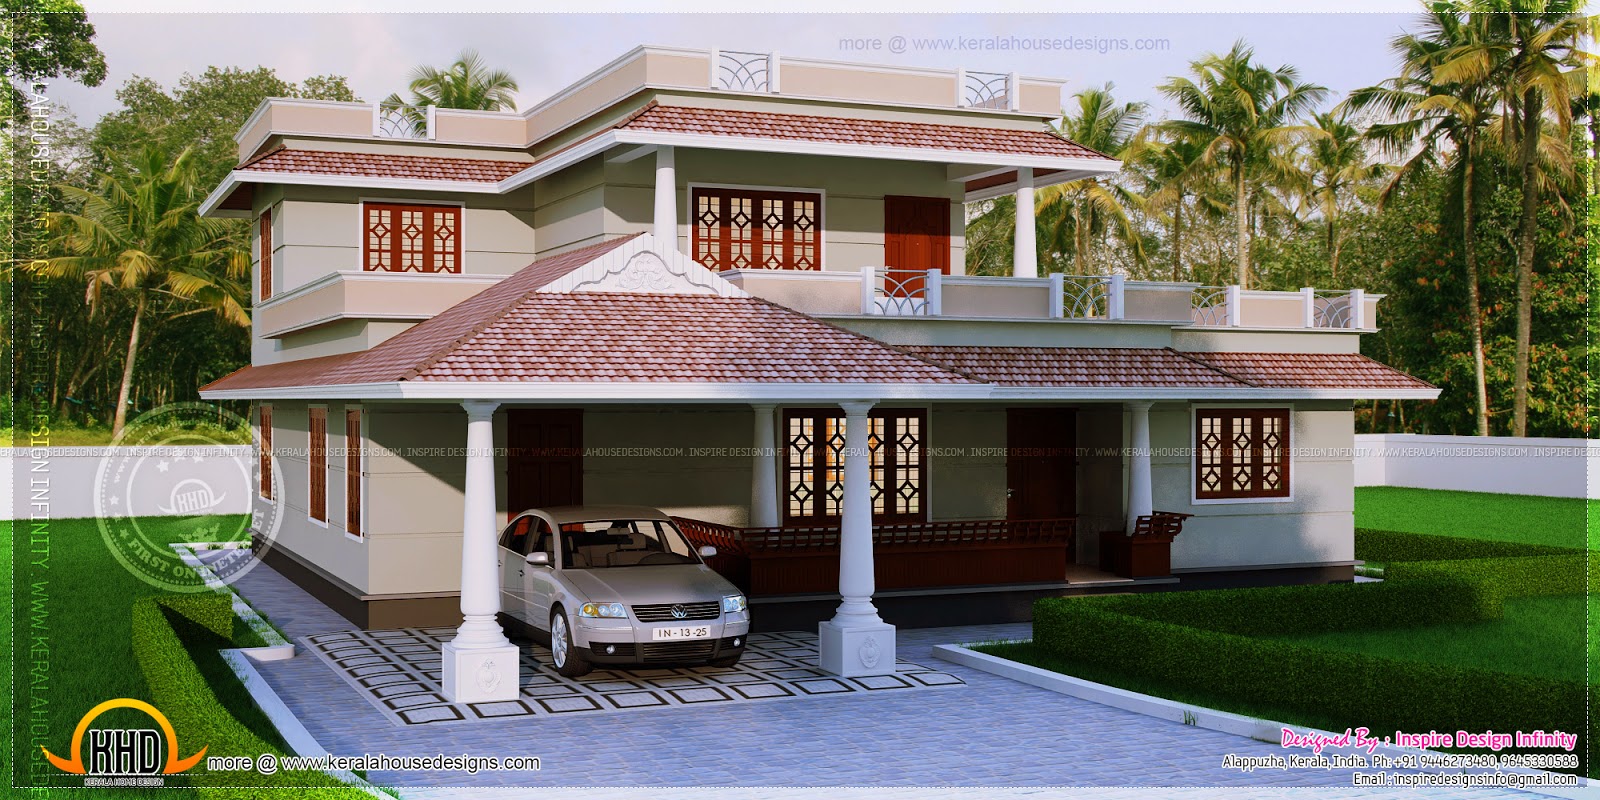  4  bedroom  Kerala style  house  in 300 square yards Indian  